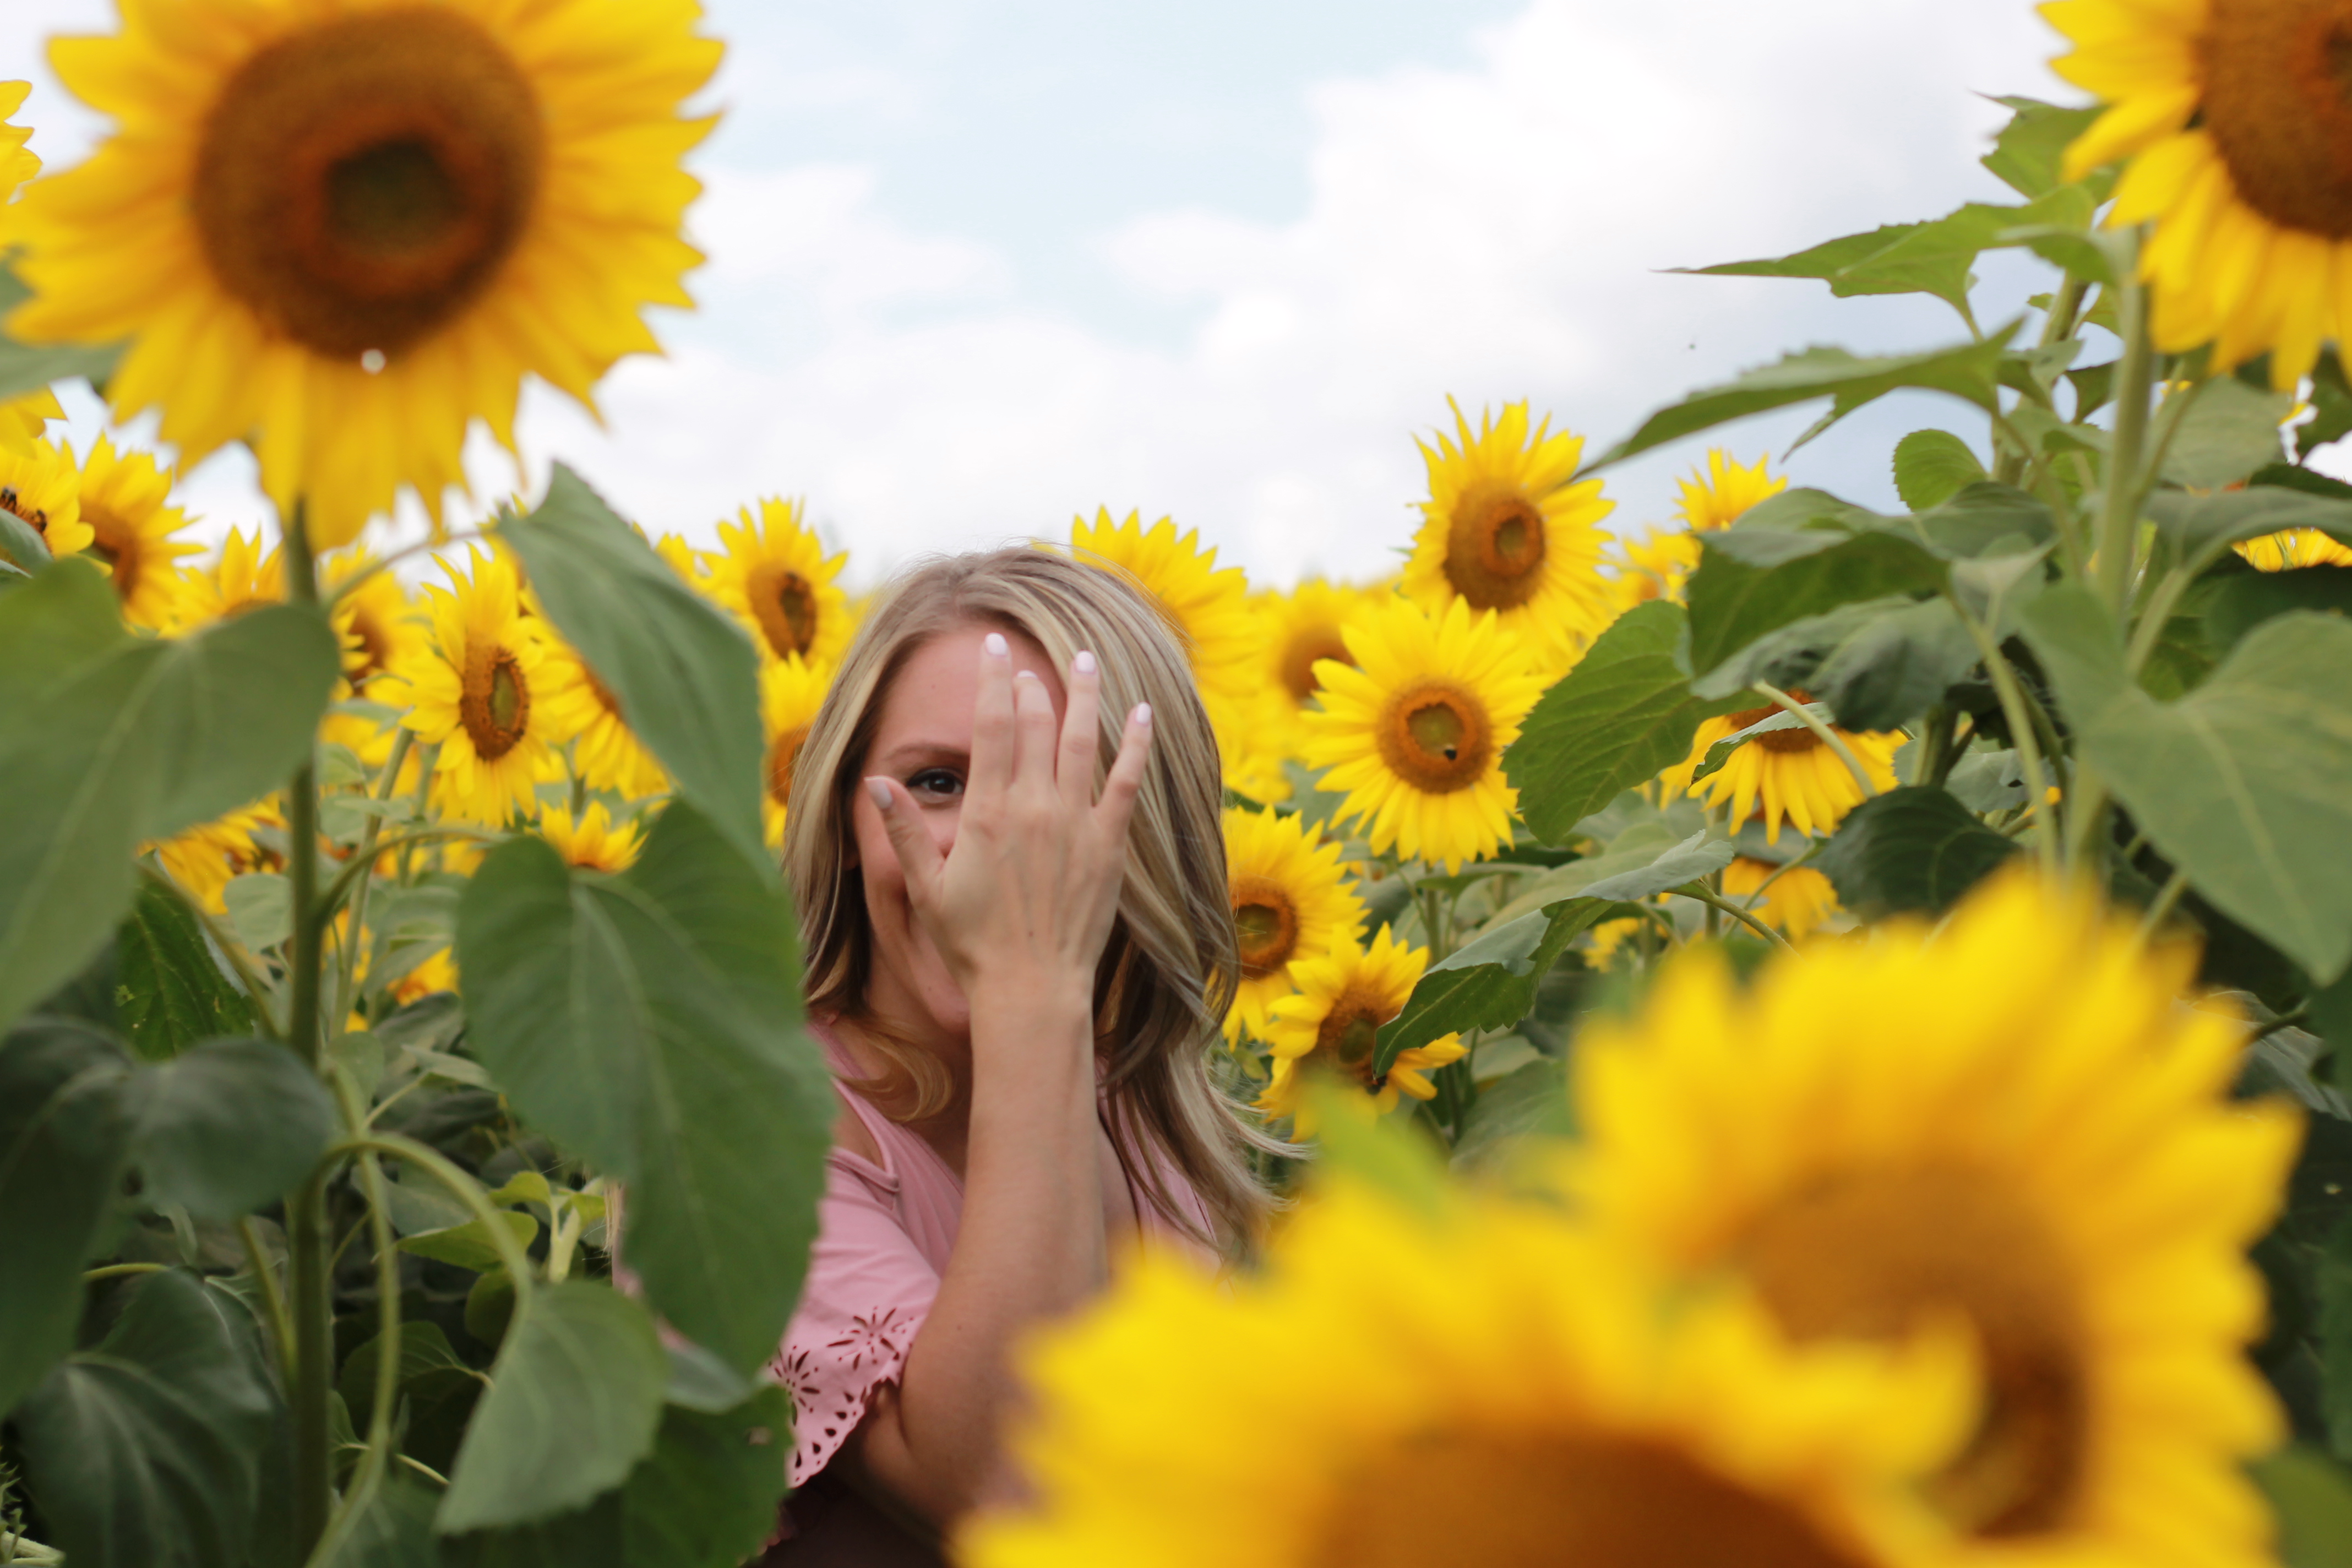 Photoshoot in sunflower field at Colby Farmstand in Newbury, MA | Our Little Home Style